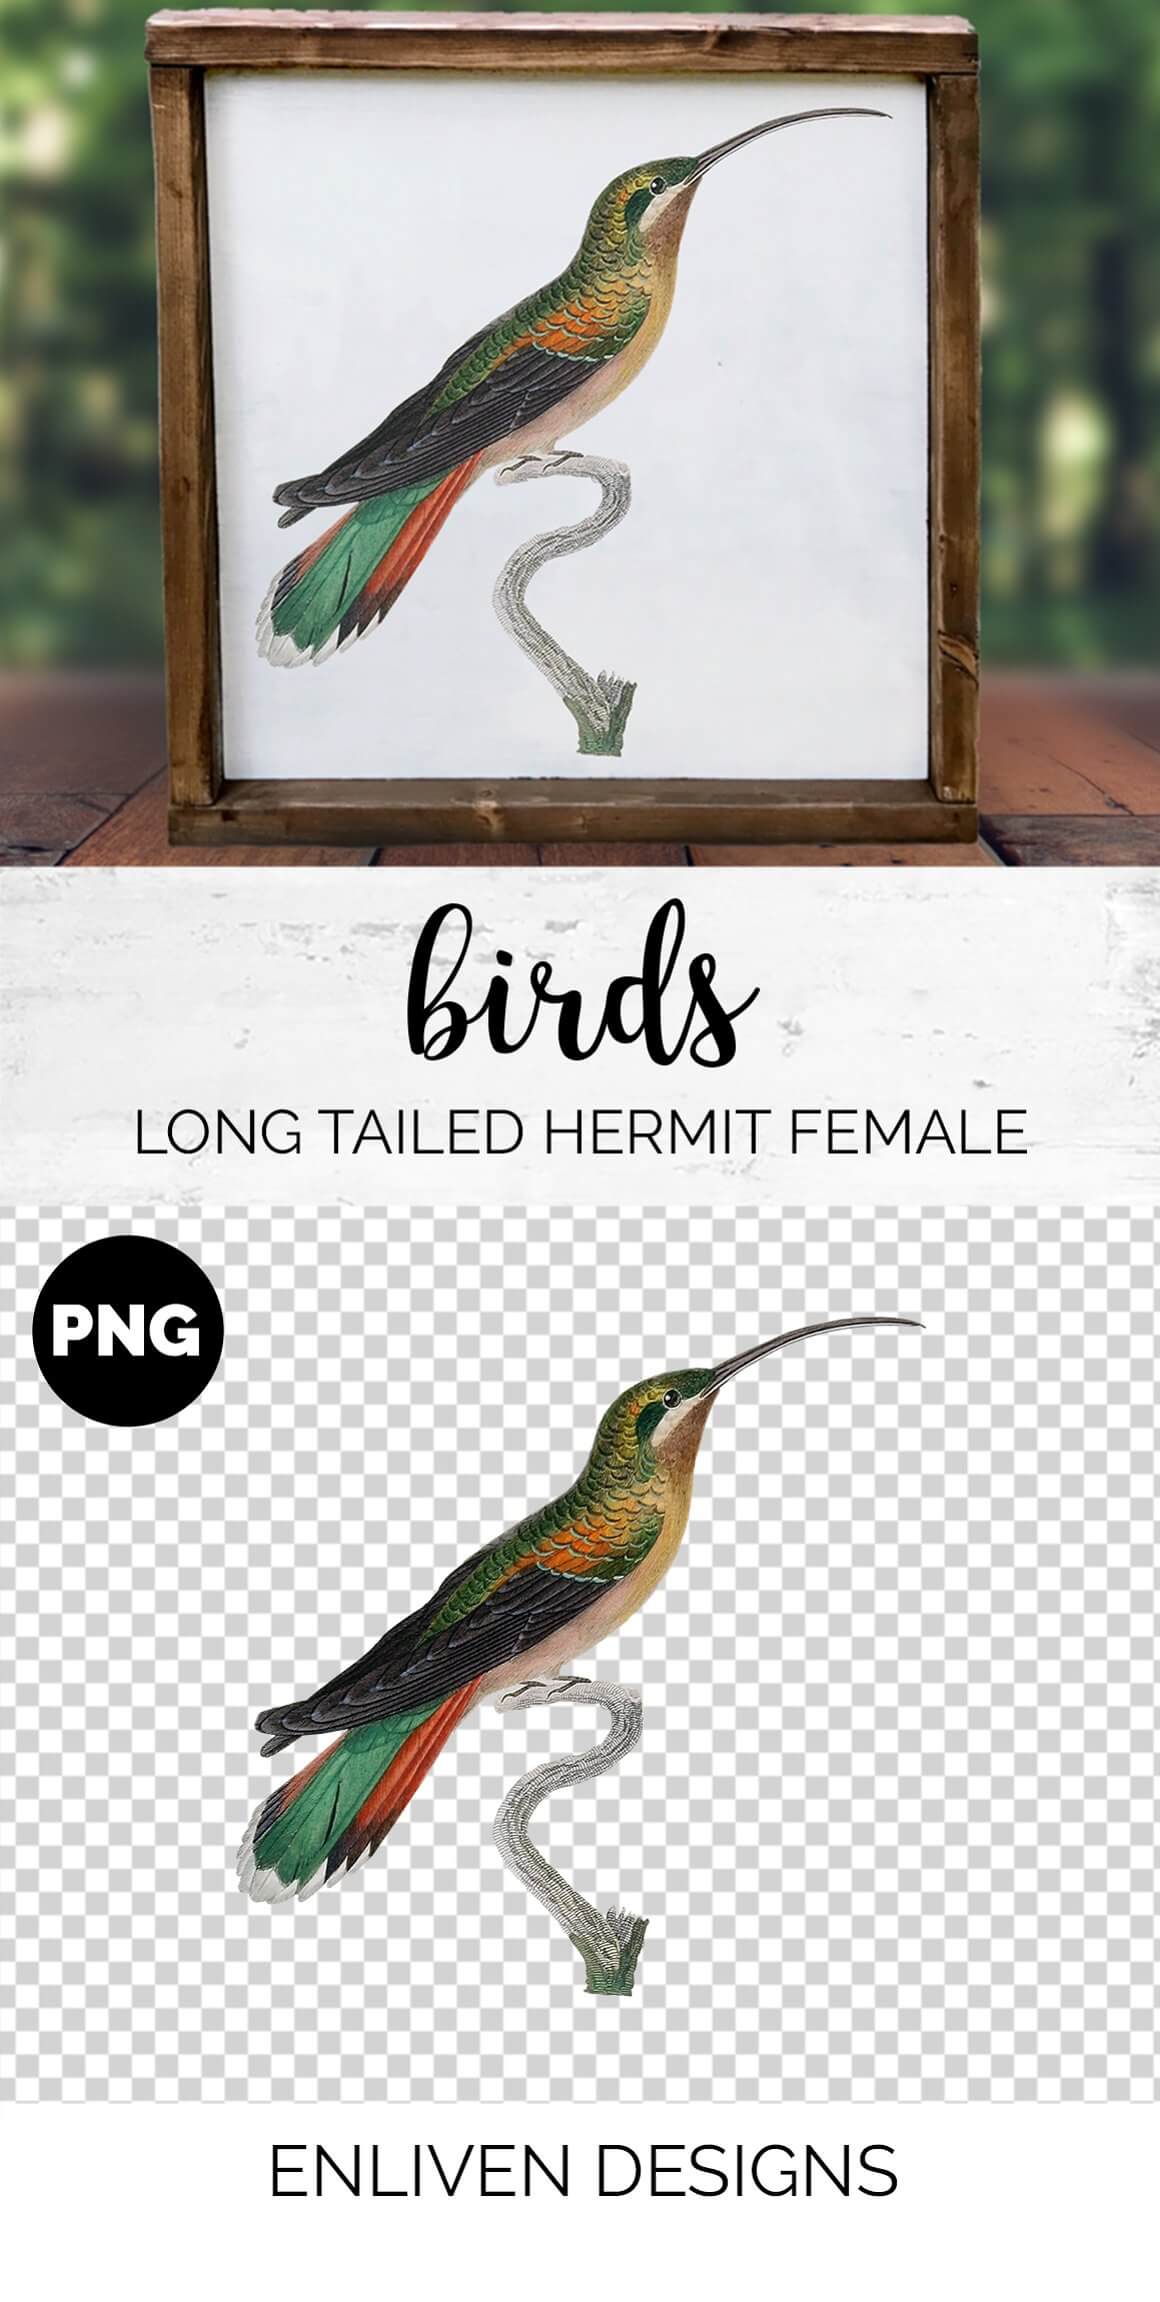 Birds Long Tailed Hermit Female, Enliven Designs.